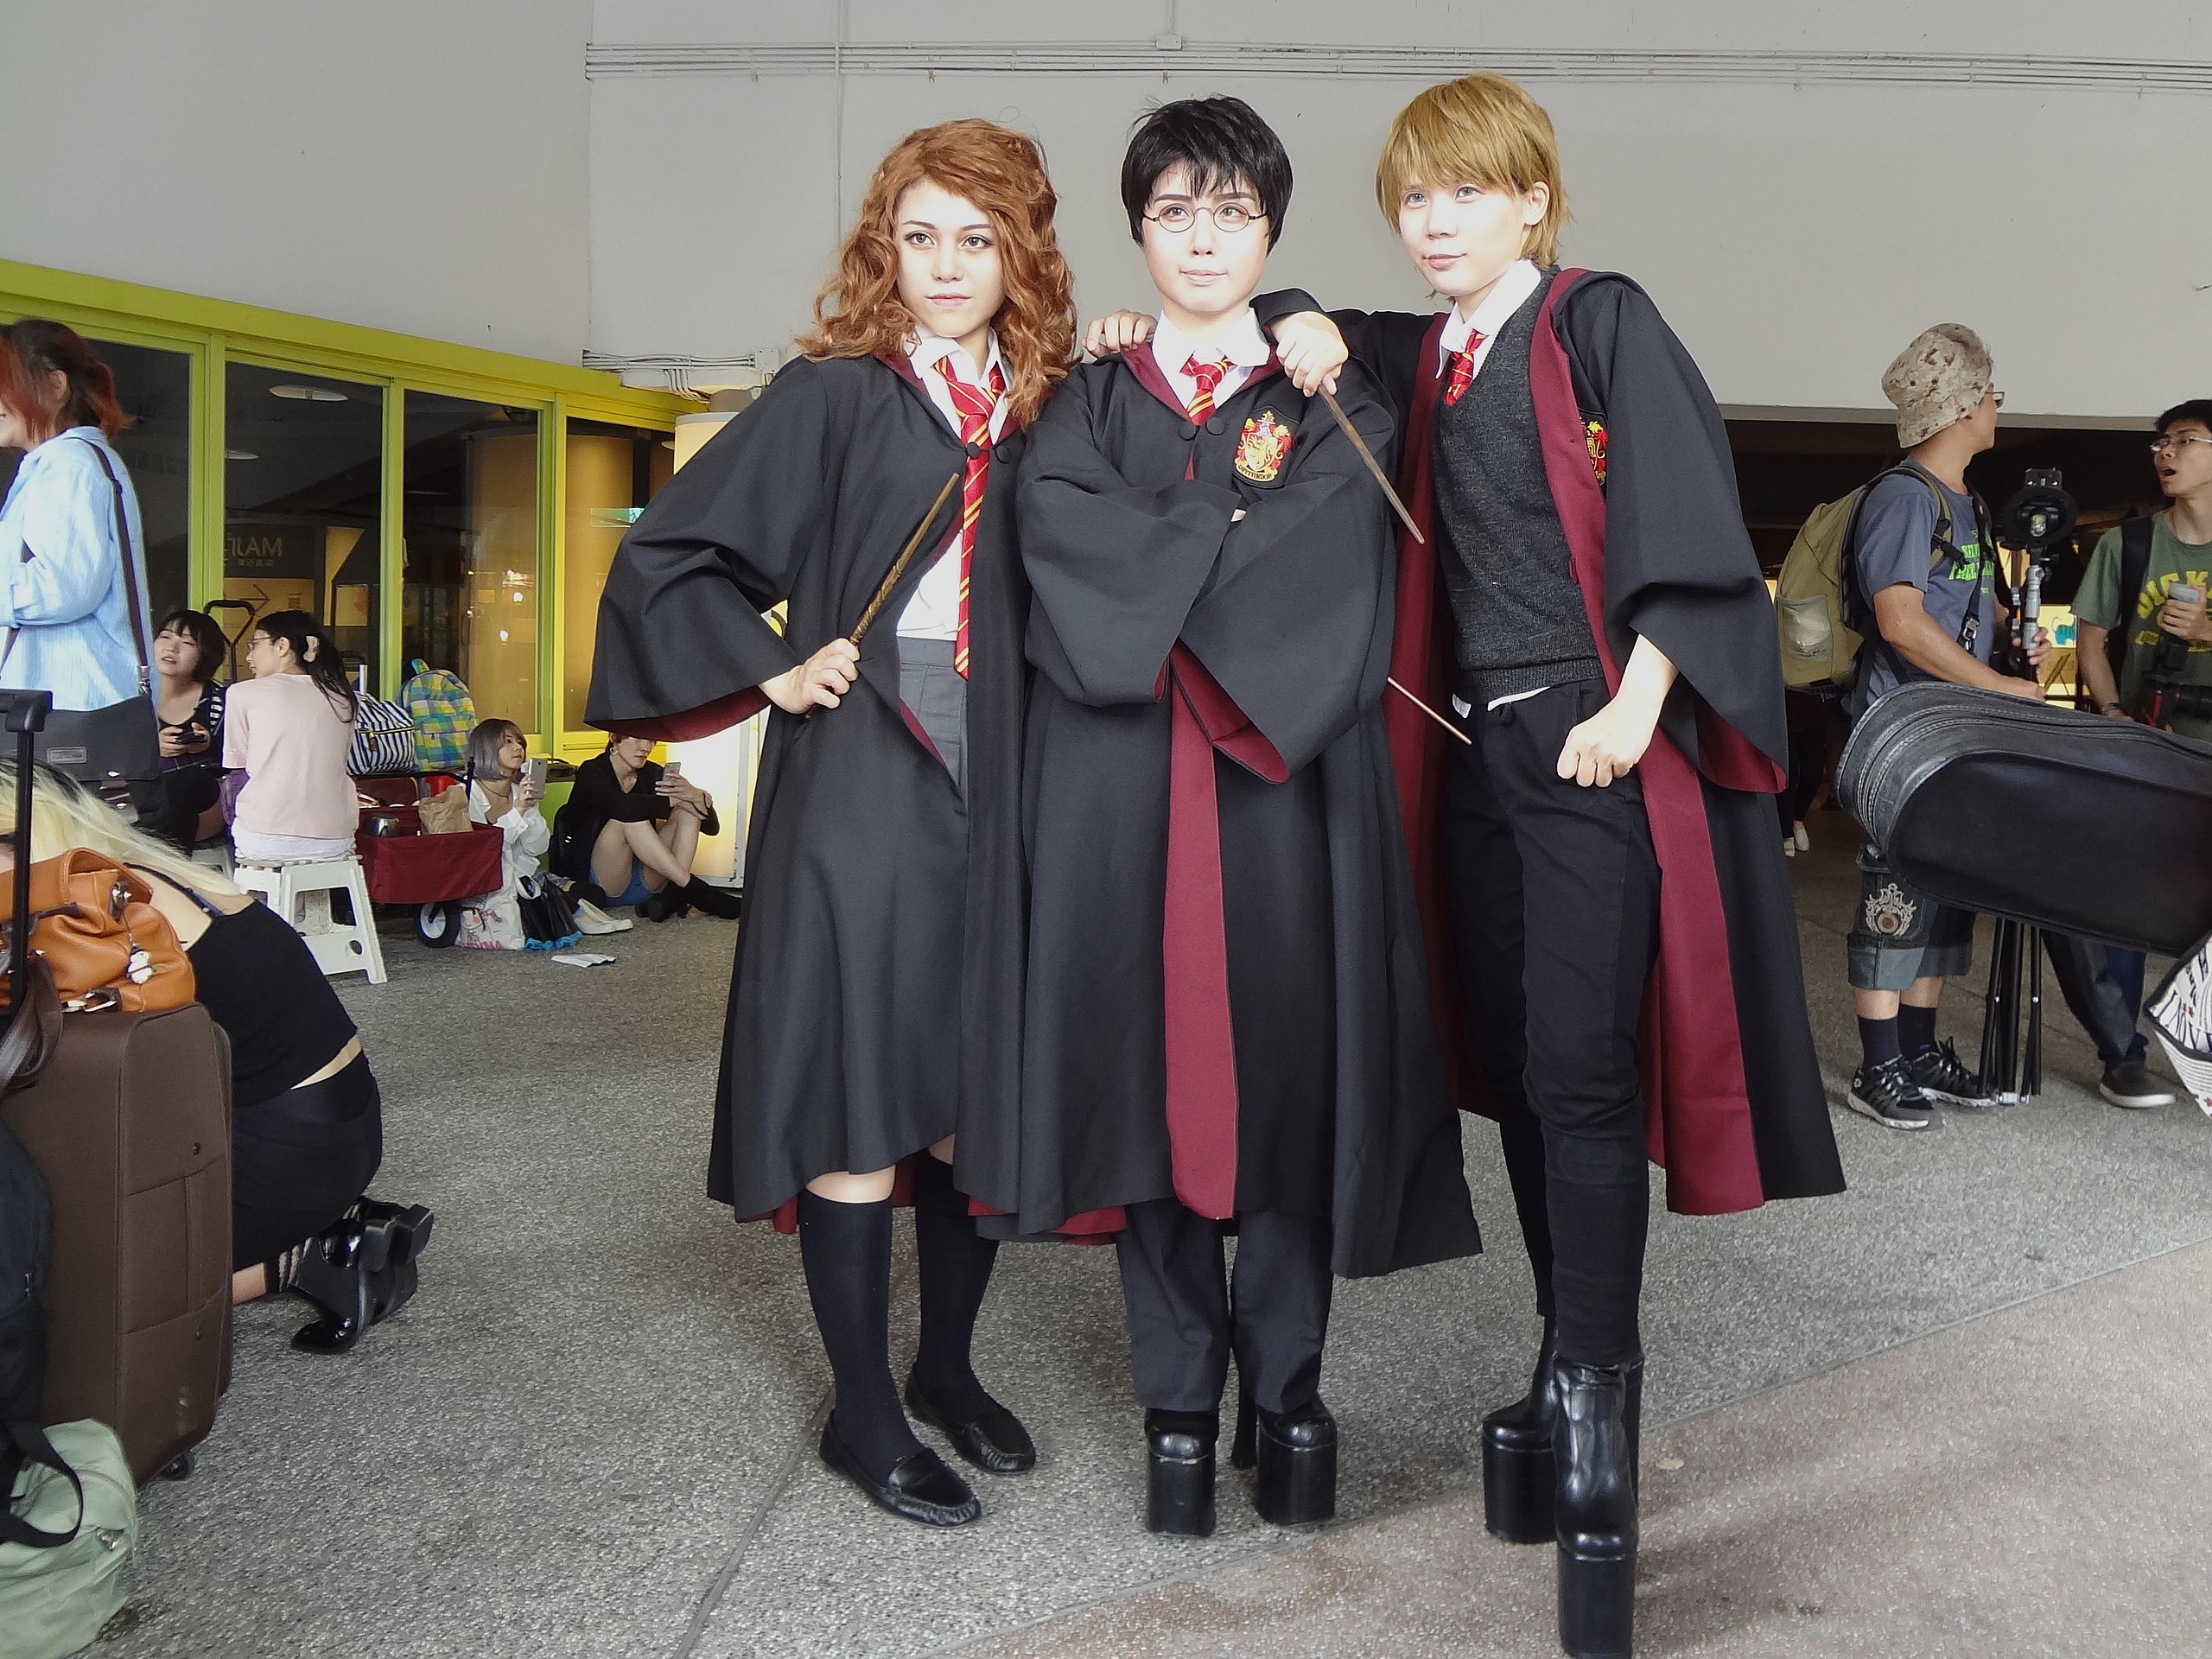 File:Cosplayers of Hermione Granger, Harry Potter and Ron Weasley